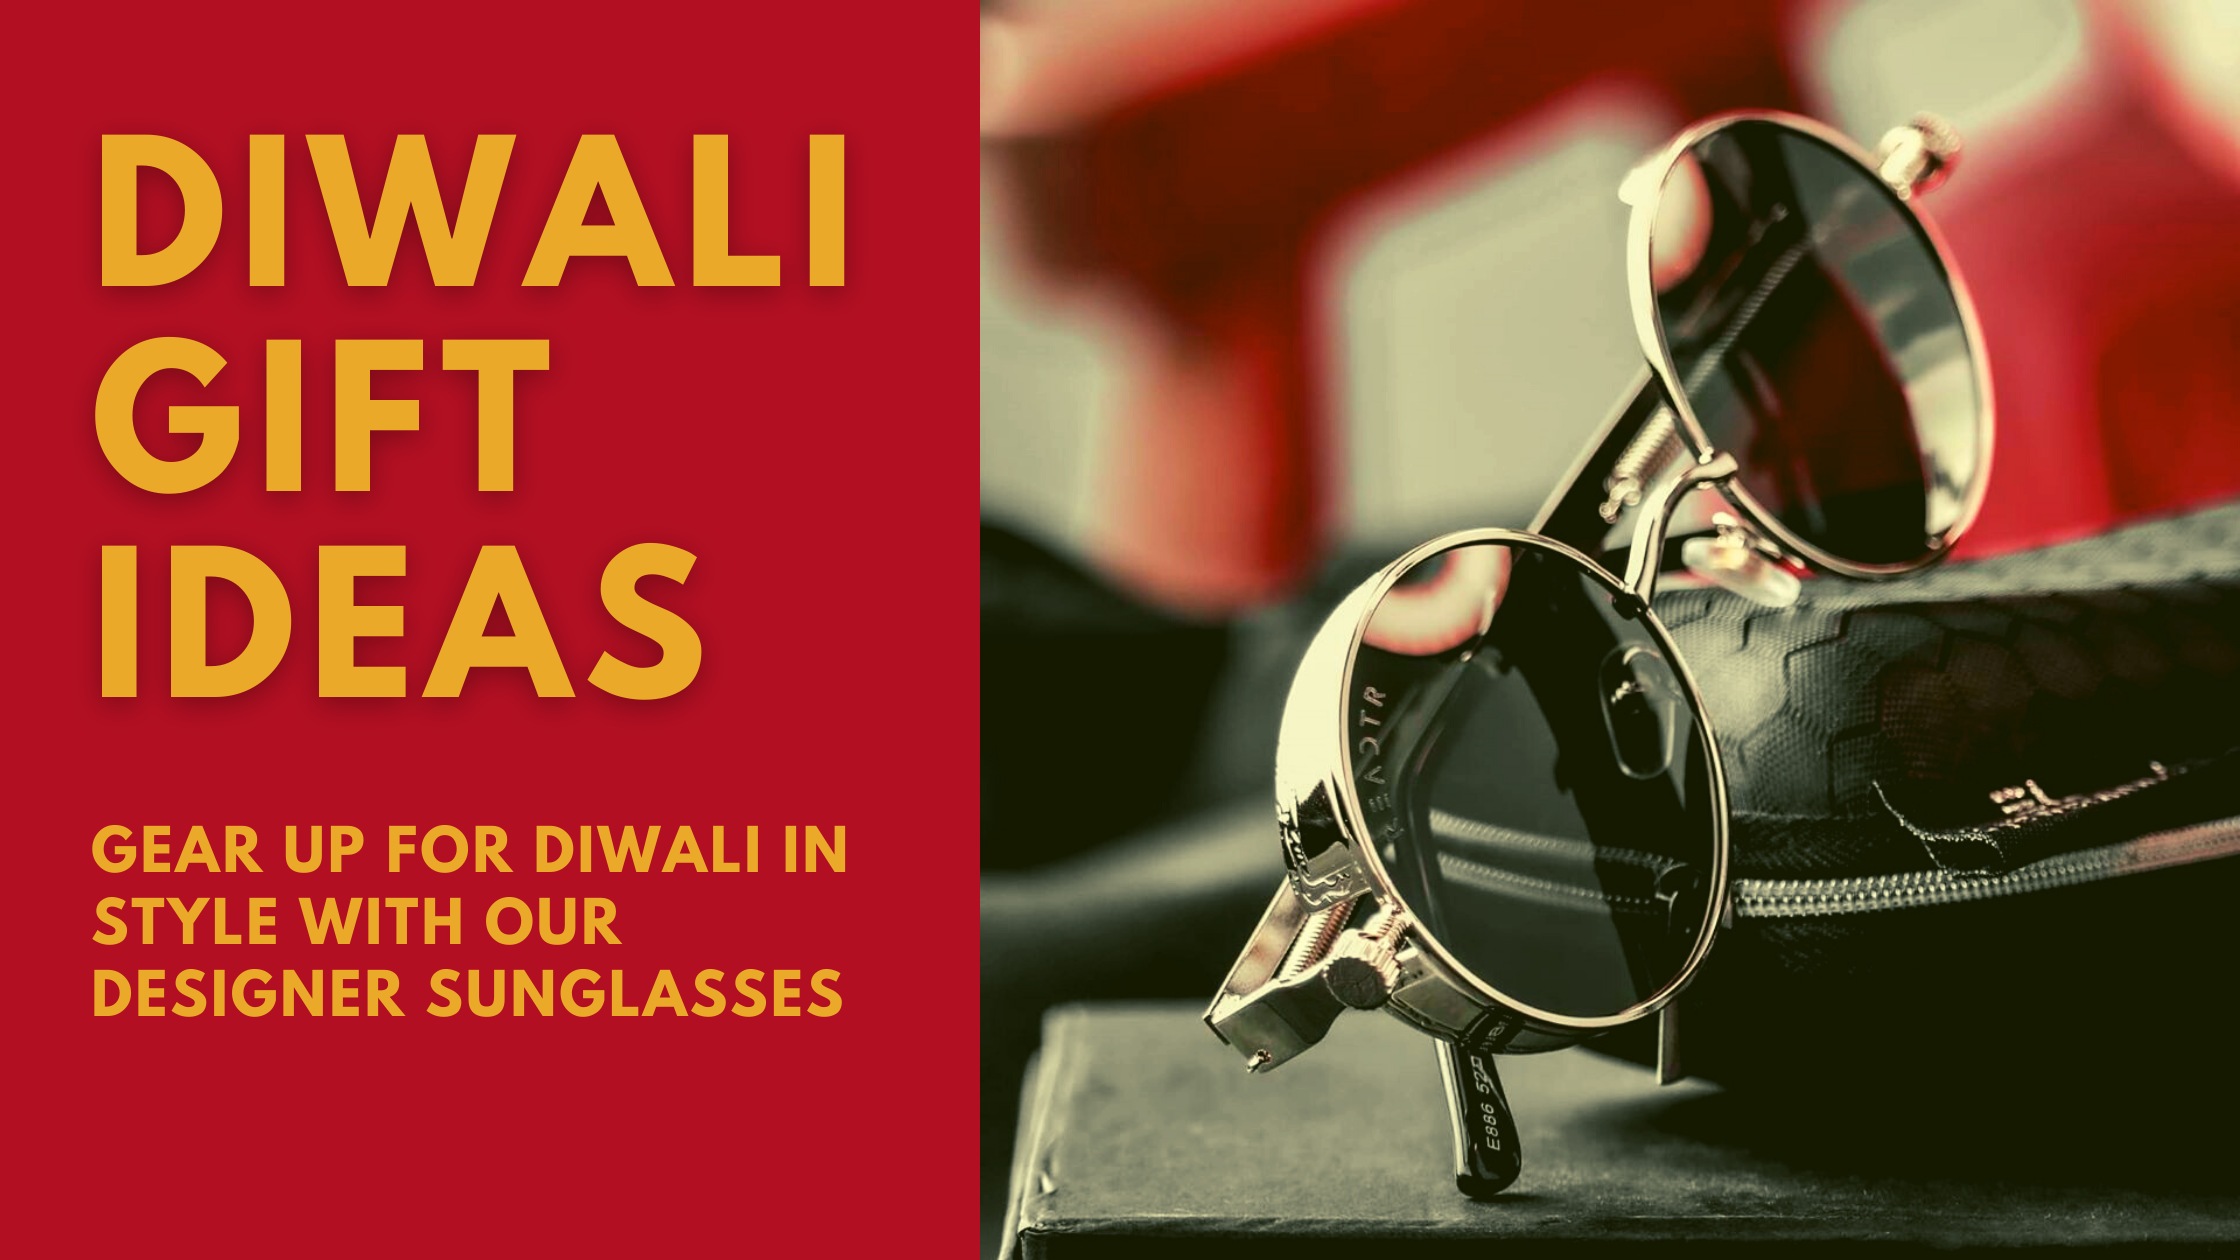 Diwali Gift Ideas : Surprise your loved ones with these amazing sunglasses this festive season